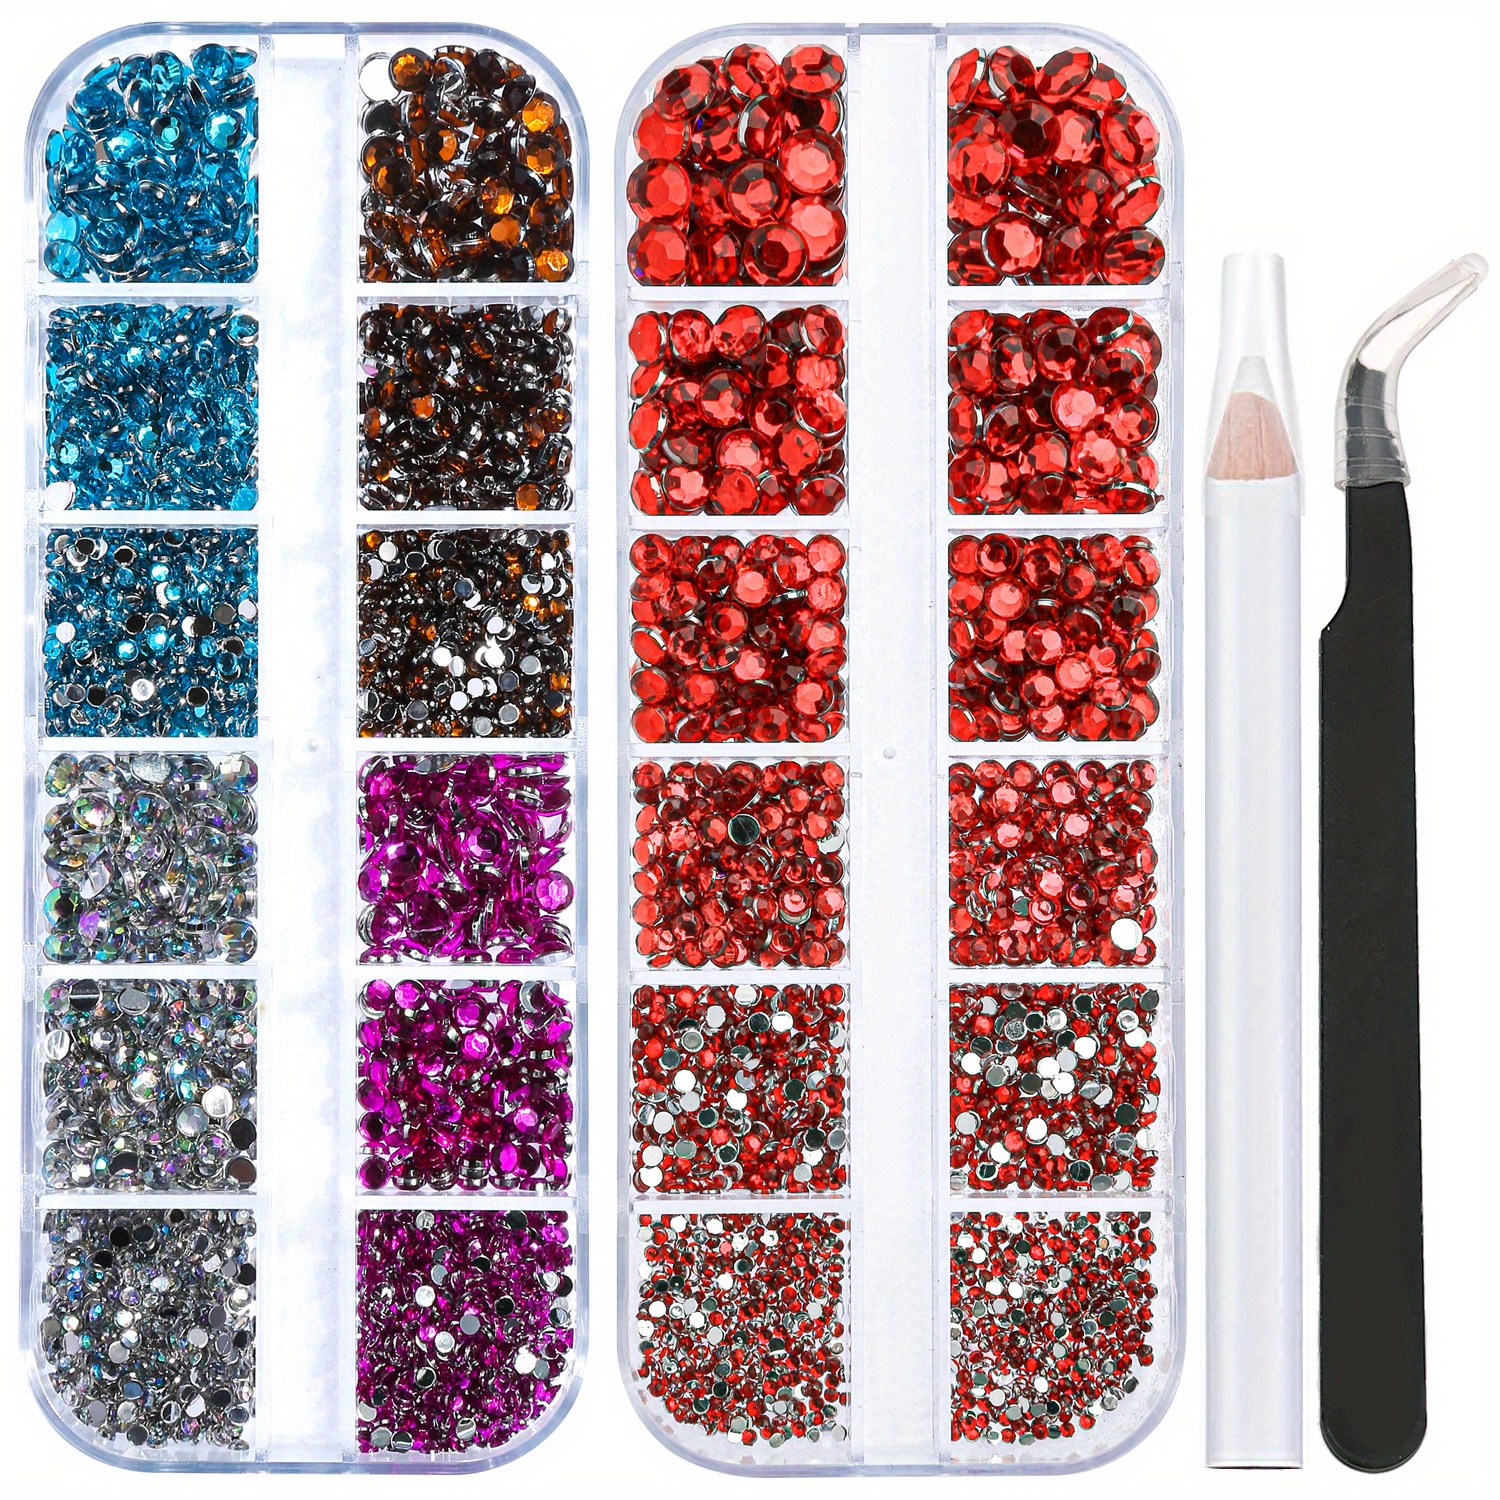 2 Packs Of Flatback Rhinestones 5660 Pcs Colorful Nail Art Rhinestones Flatback Crystal Colorful With Picker Pencil And Tweezer For Nail Art And Decoration